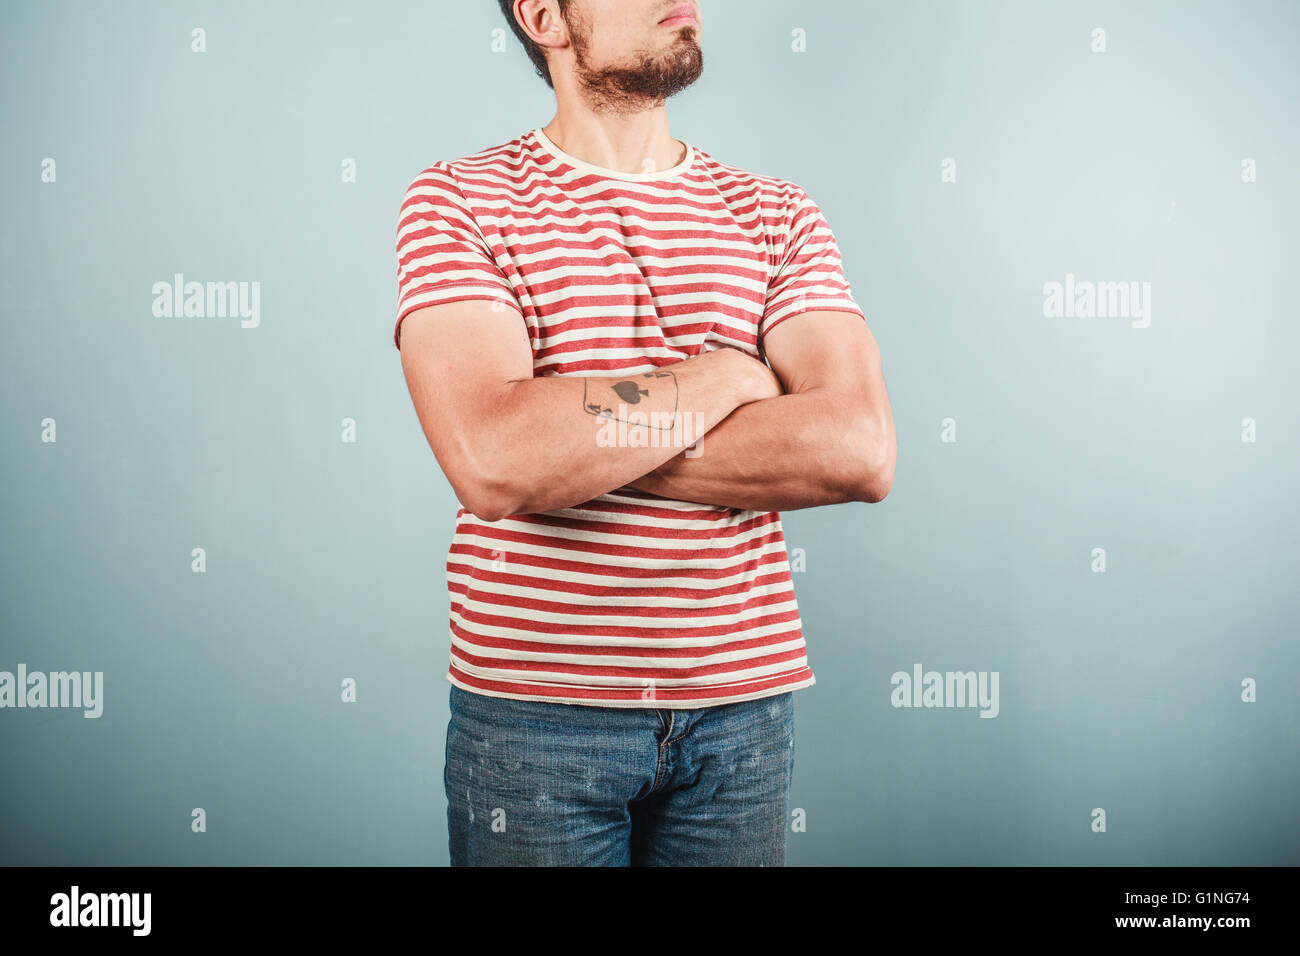 A young man with a tattoo is wearing a striped shirt and standing with his arms crossed Stock Photo